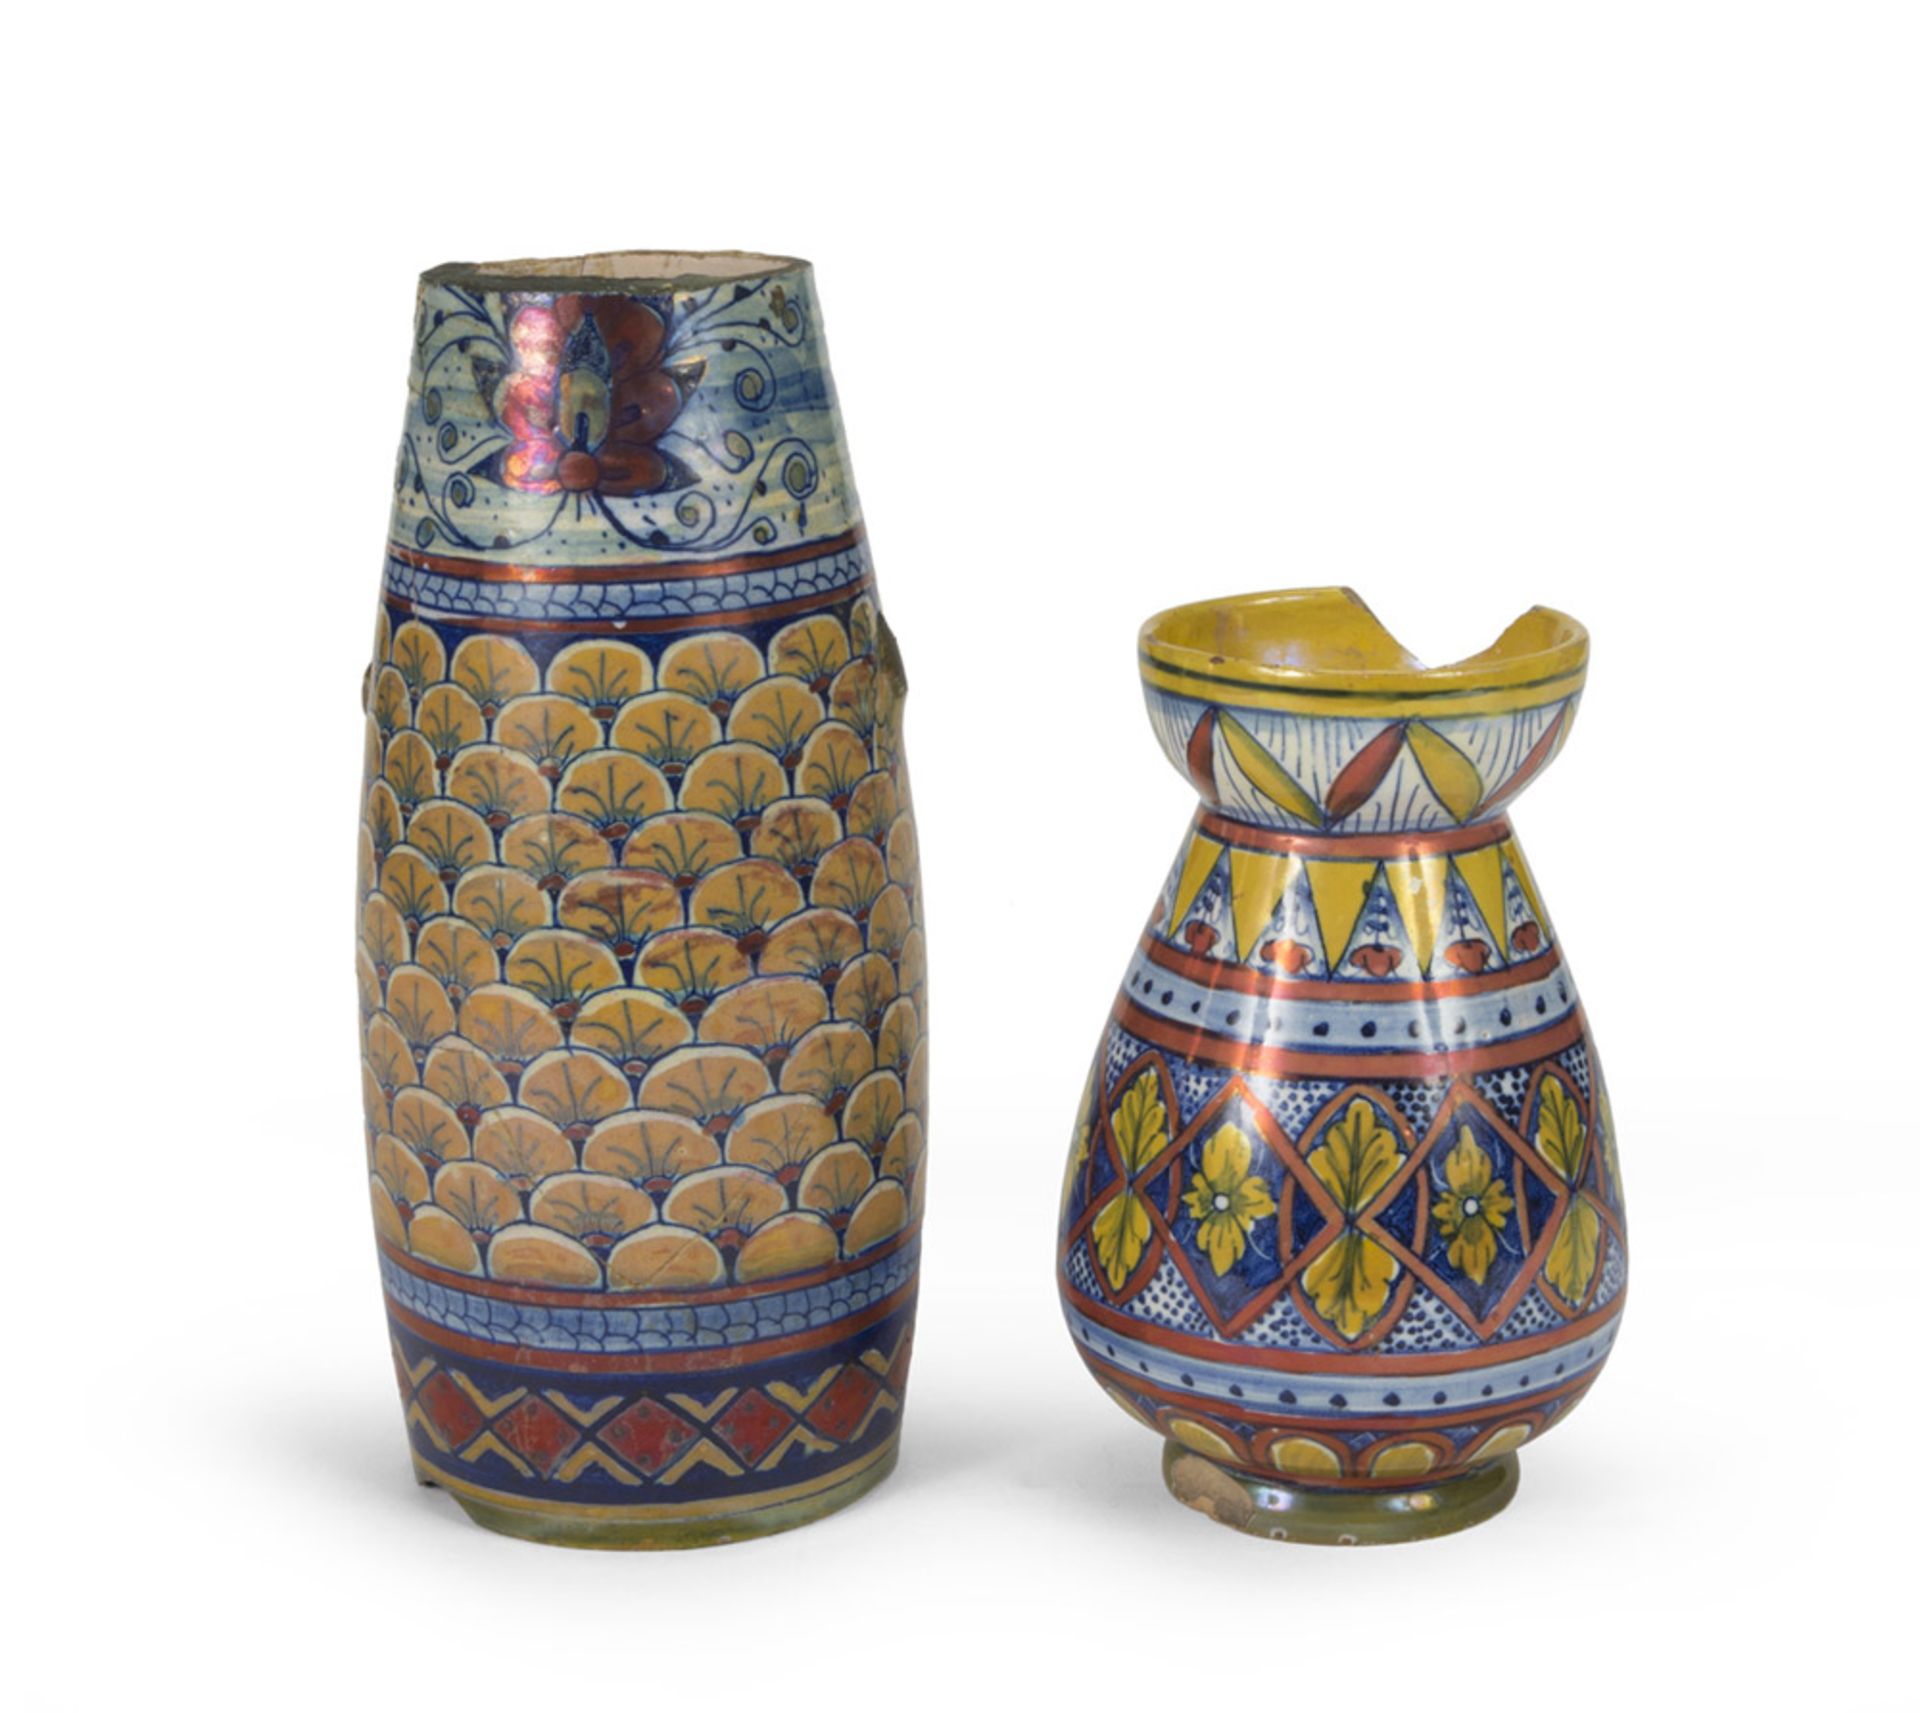 REMAINS OF TWO CERAMIC VASES, MARKED SANTARELLI, EARLY 20TH CENTURY